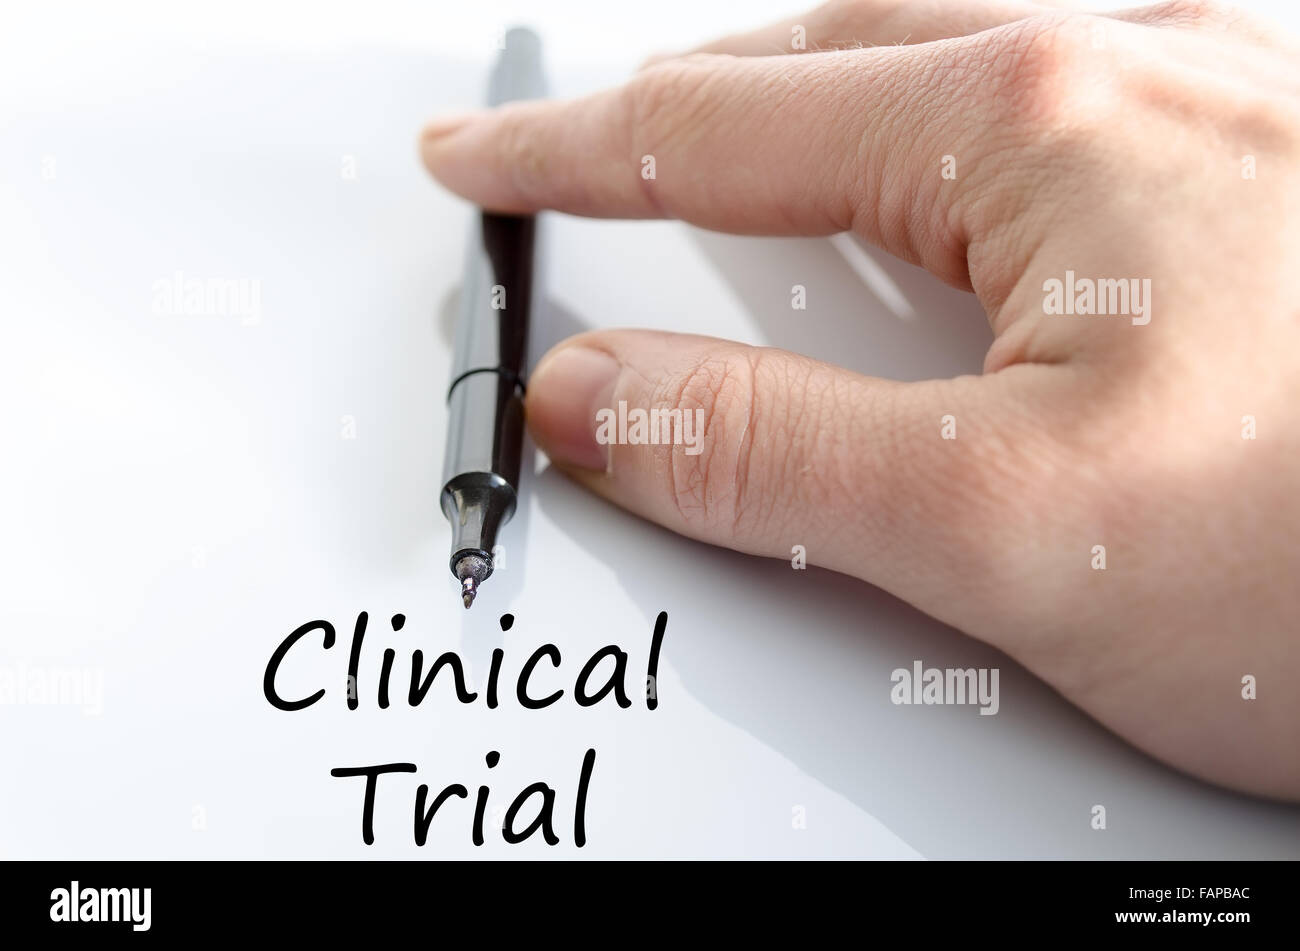 Clinical trial text concept isolated over white background Stock Photo